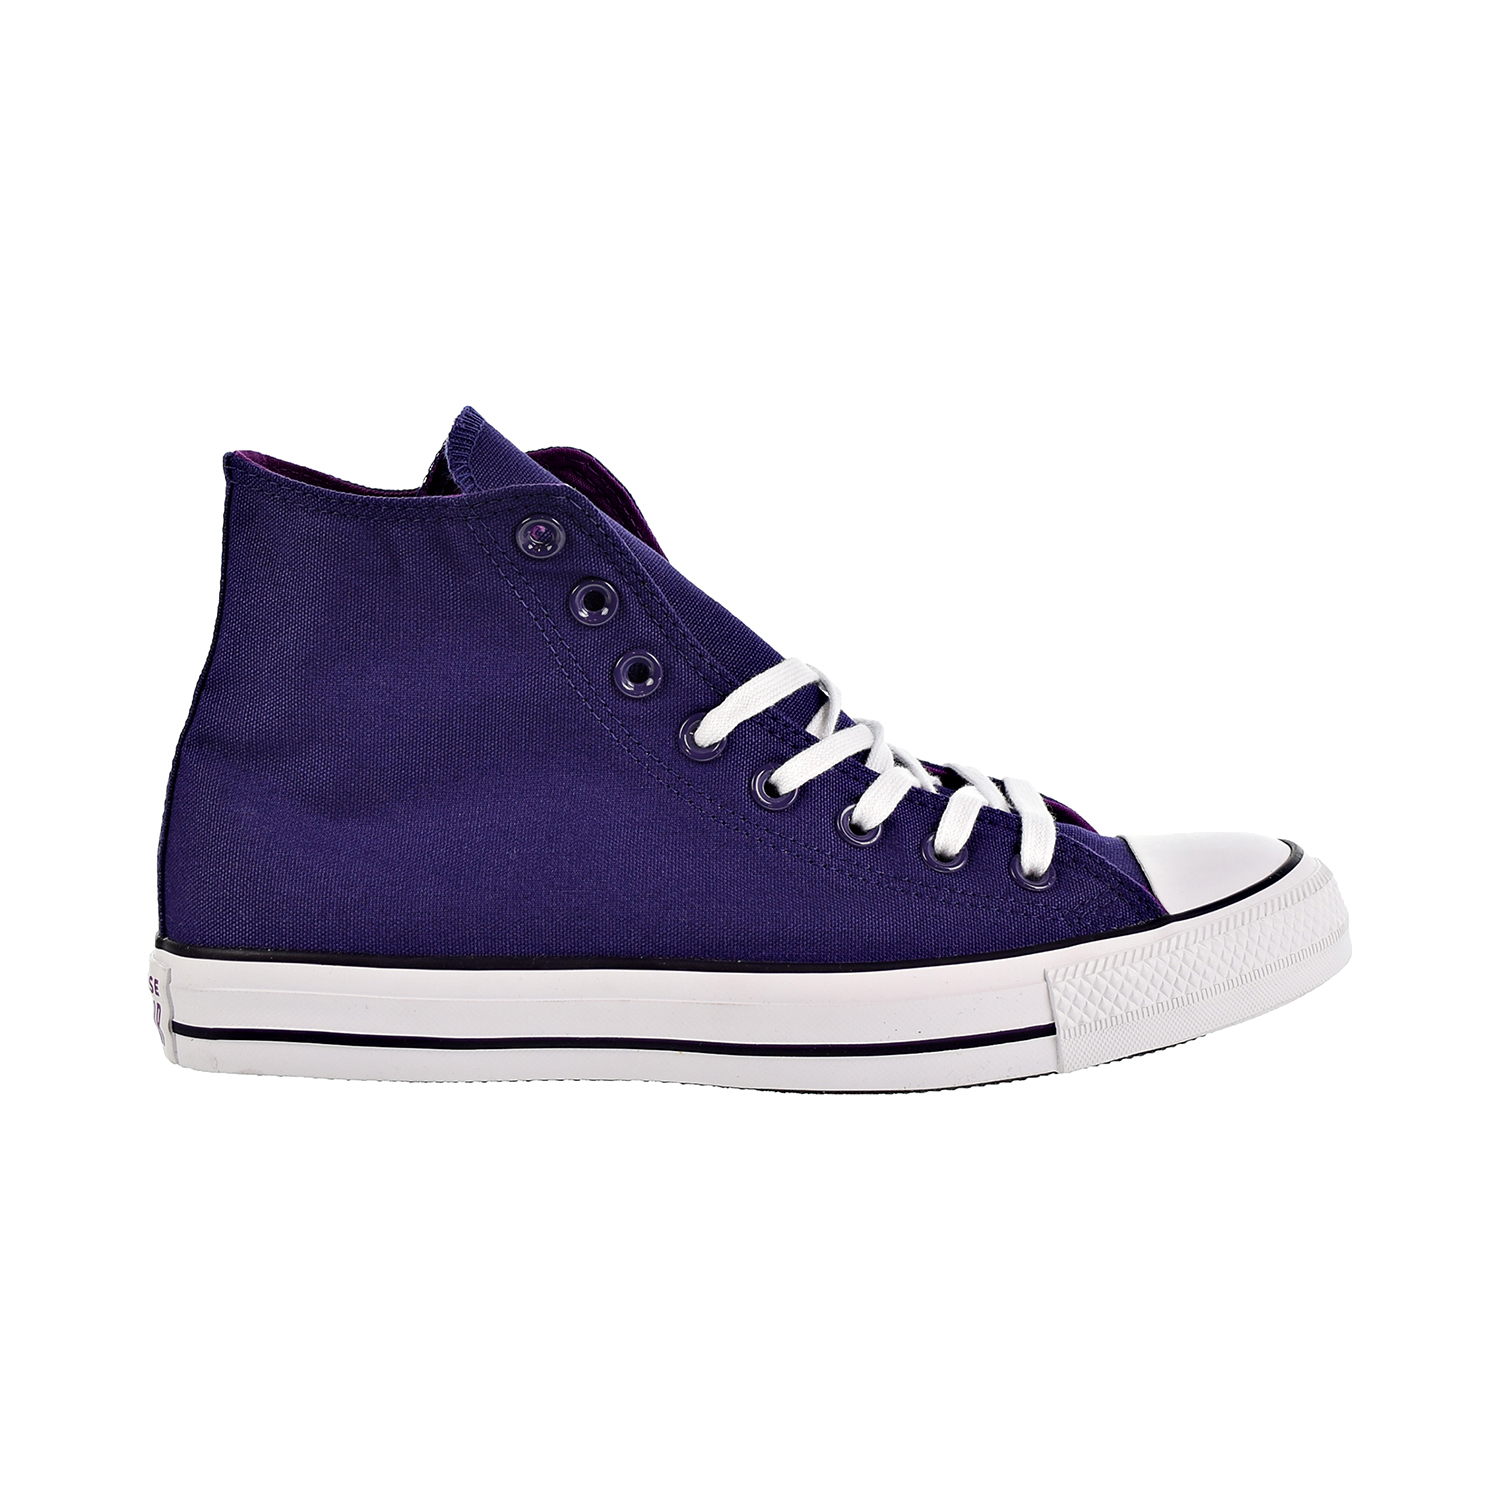 Converse Chuck Taylor All Star Seasonal Color Hi Unisex/Men's Shoes New Orchid 162450f - image 1 of 6